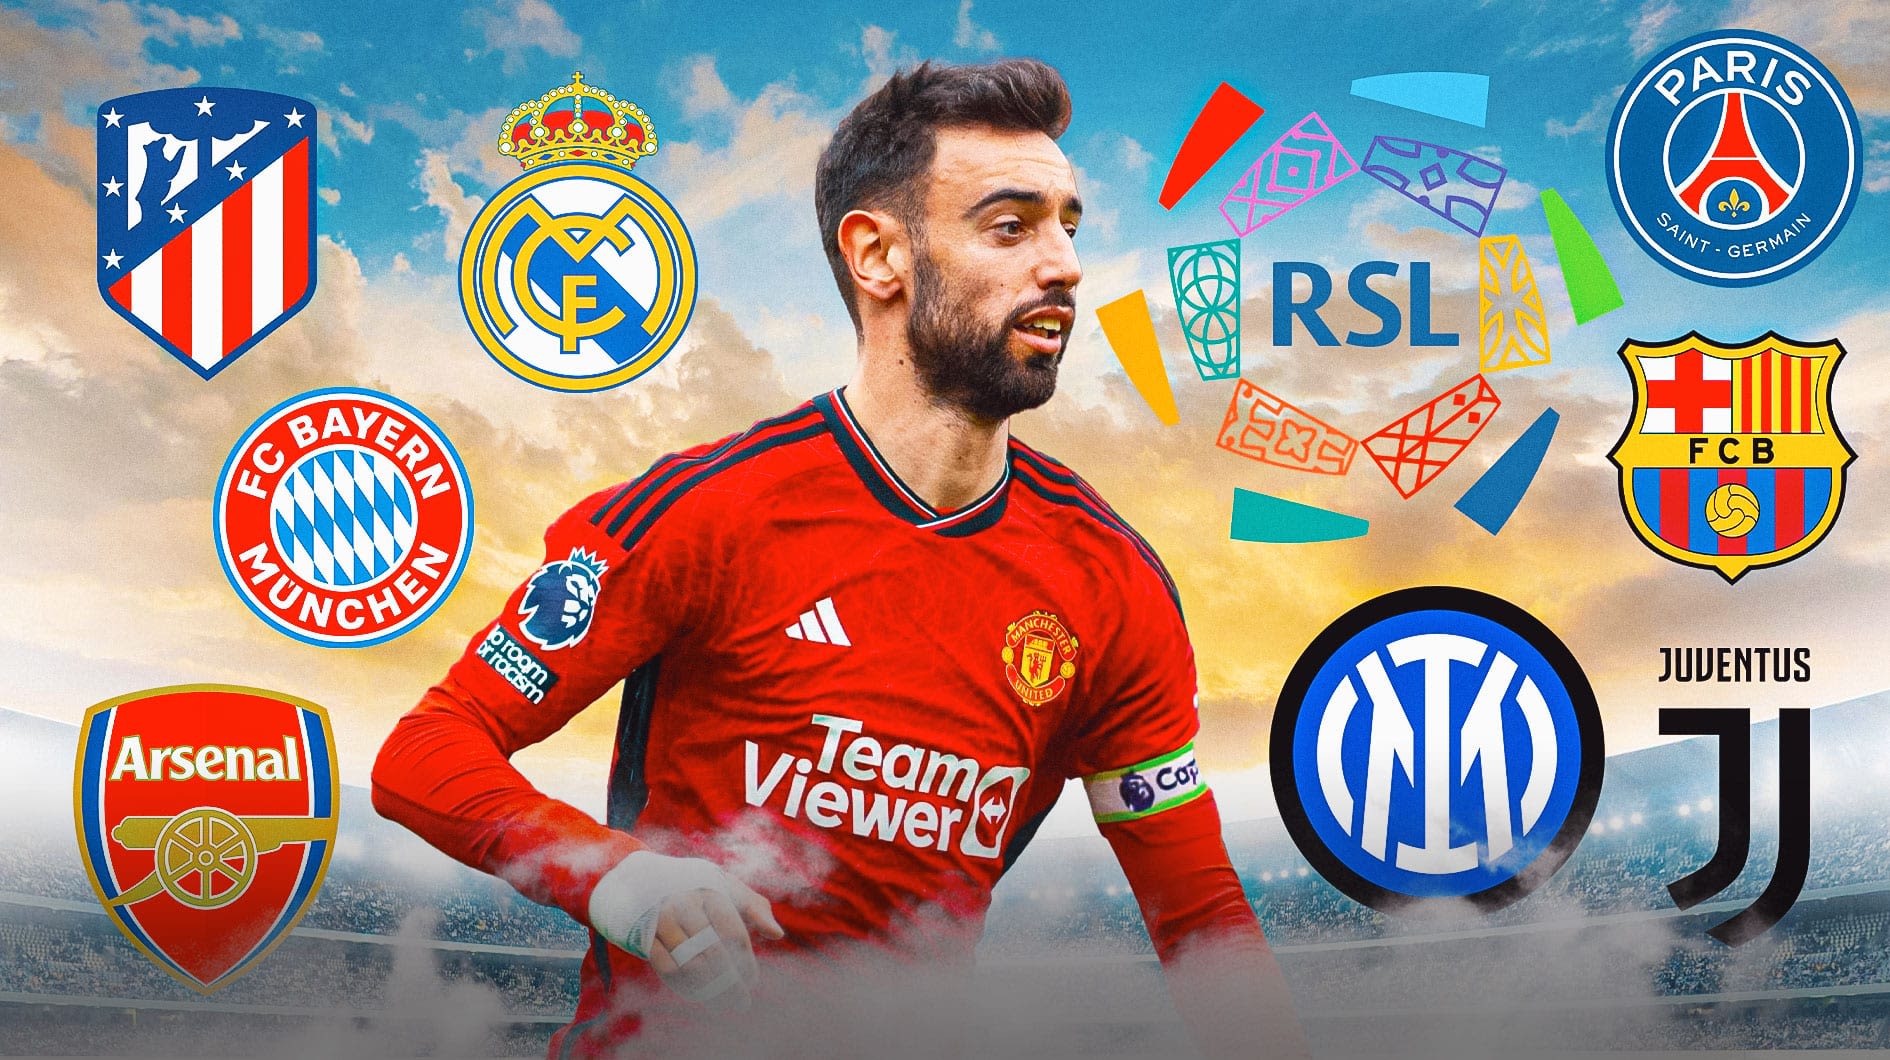 Five clubs Bruno Fernandes could join after leaving Manchester United this summer